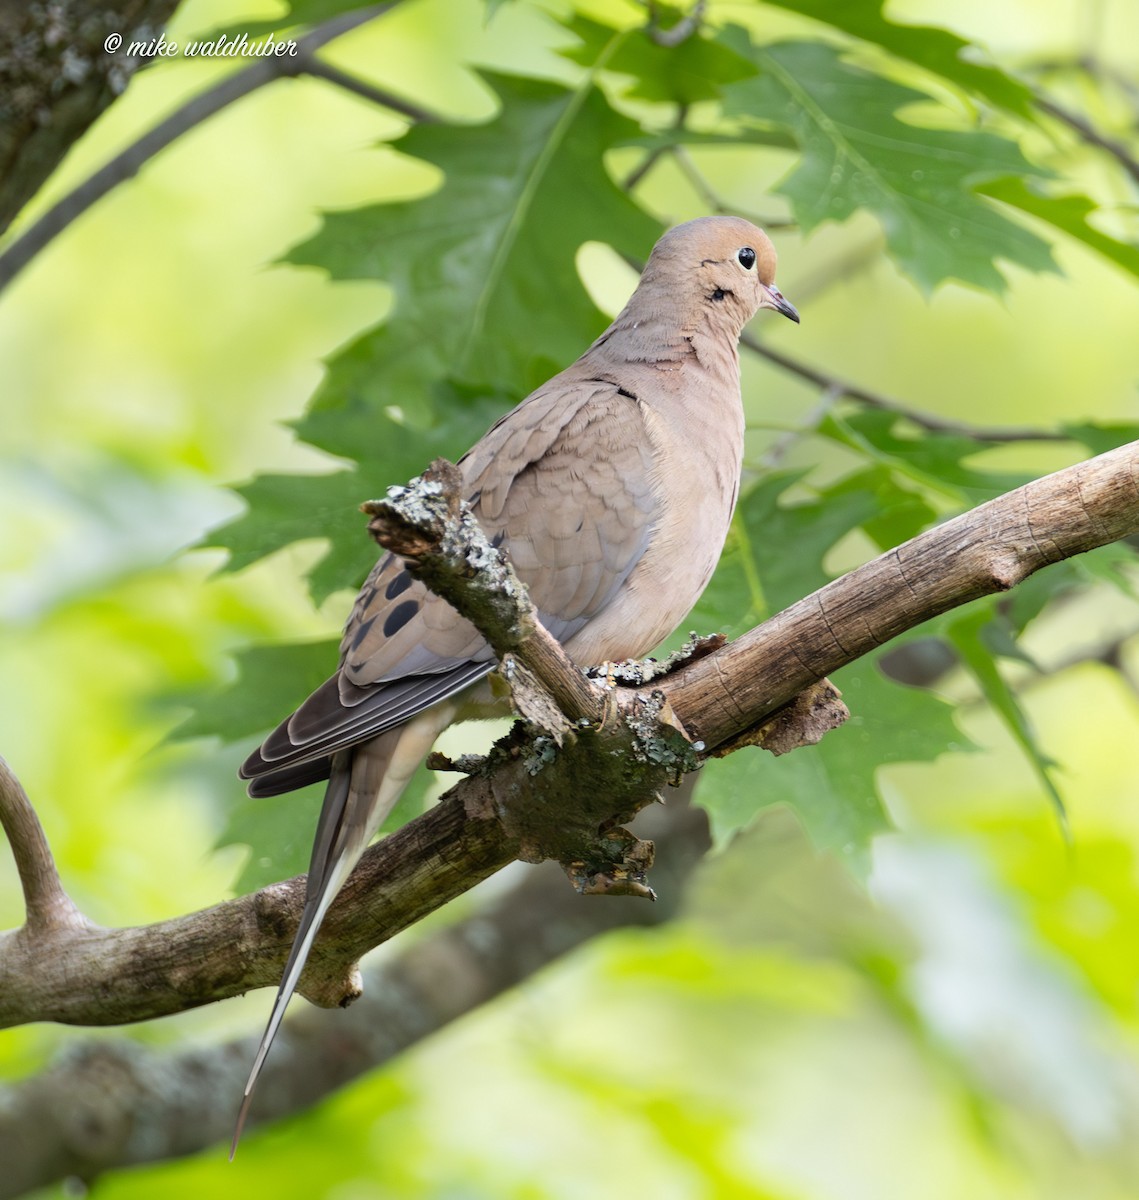 Mourning Dove - Mike Waldhuber